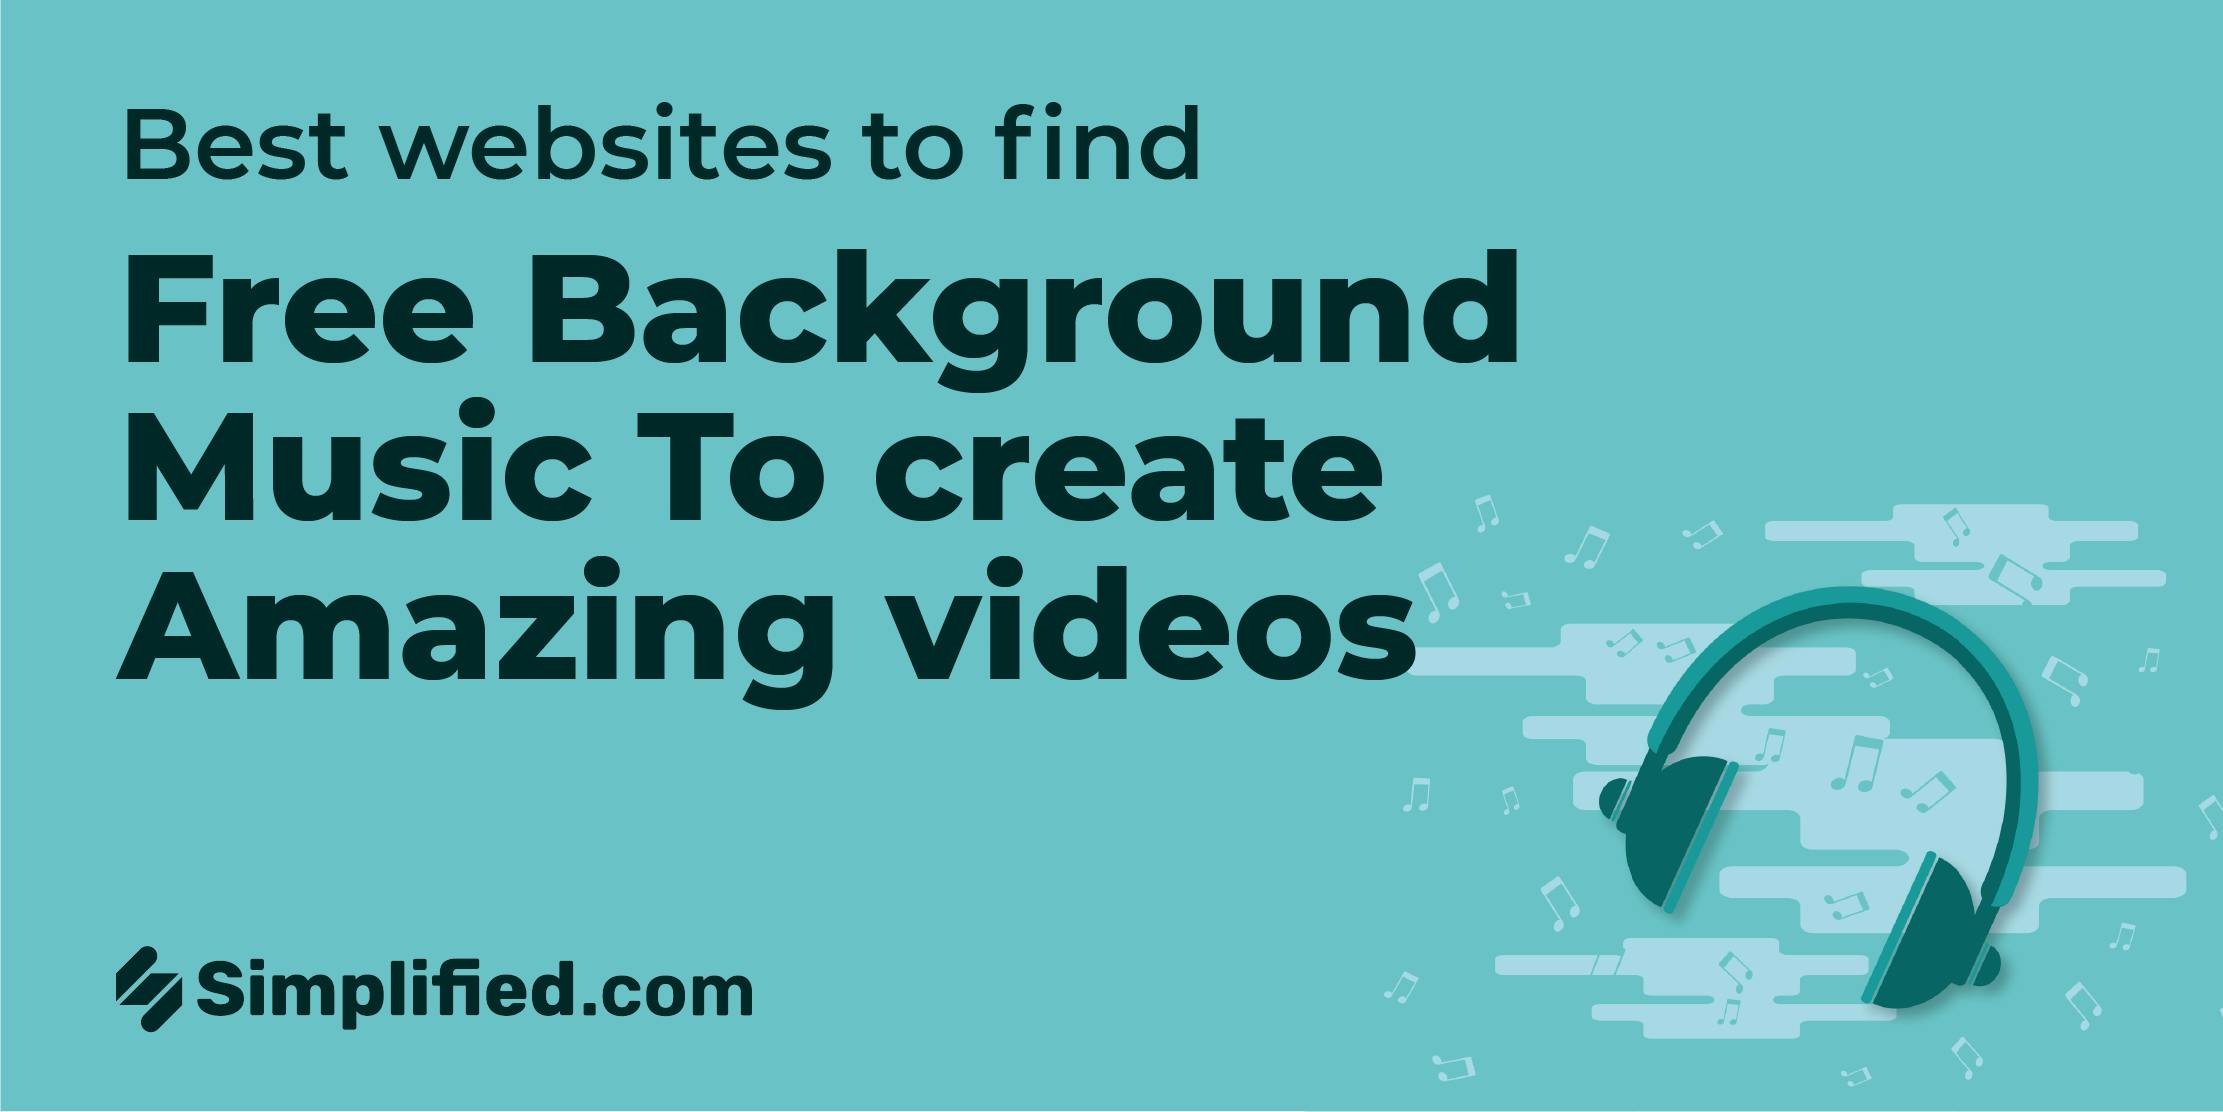 7 Best websites to find Free Background Music To create videos